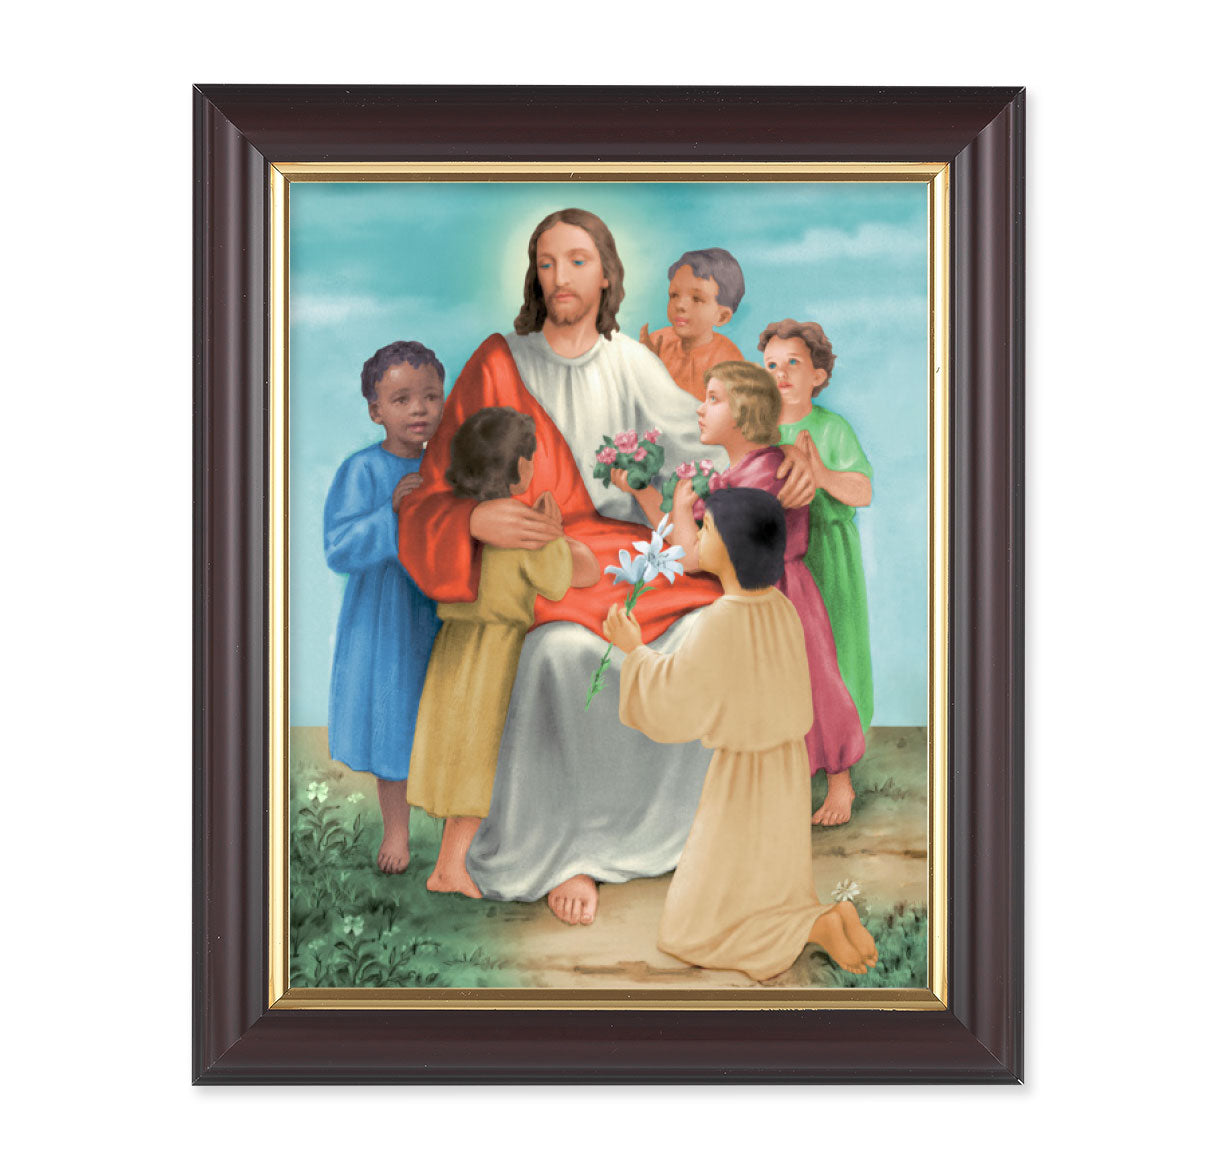 Christ with Children Picture Framed Wall Art Decor Medium, Classic Fluted Dark Walnut Finished Frame with Gold-Leaf Lip